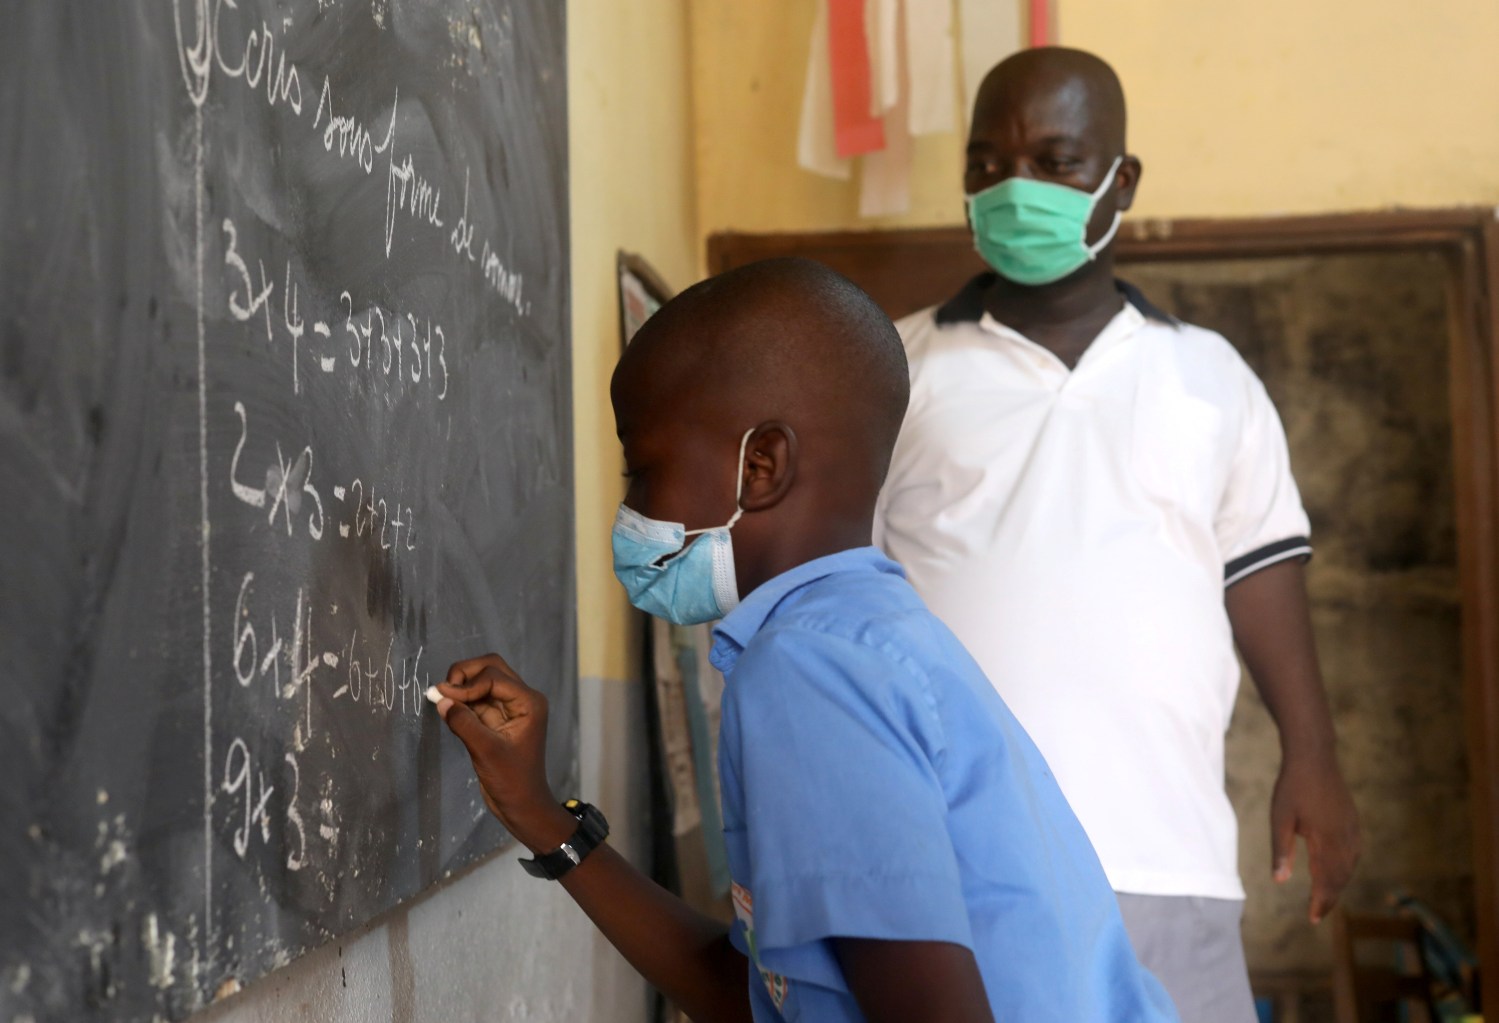 A pupil, wearing a protective mask, writes on a classroom chalkboard at the Merlan school of Paillet during the reopening of schools, as the lockdown due to coronavirus disease (COVID-19) is eased, in Abidjan, Ivory Coast May 25, 2020. REUTERS/Luc Gnago